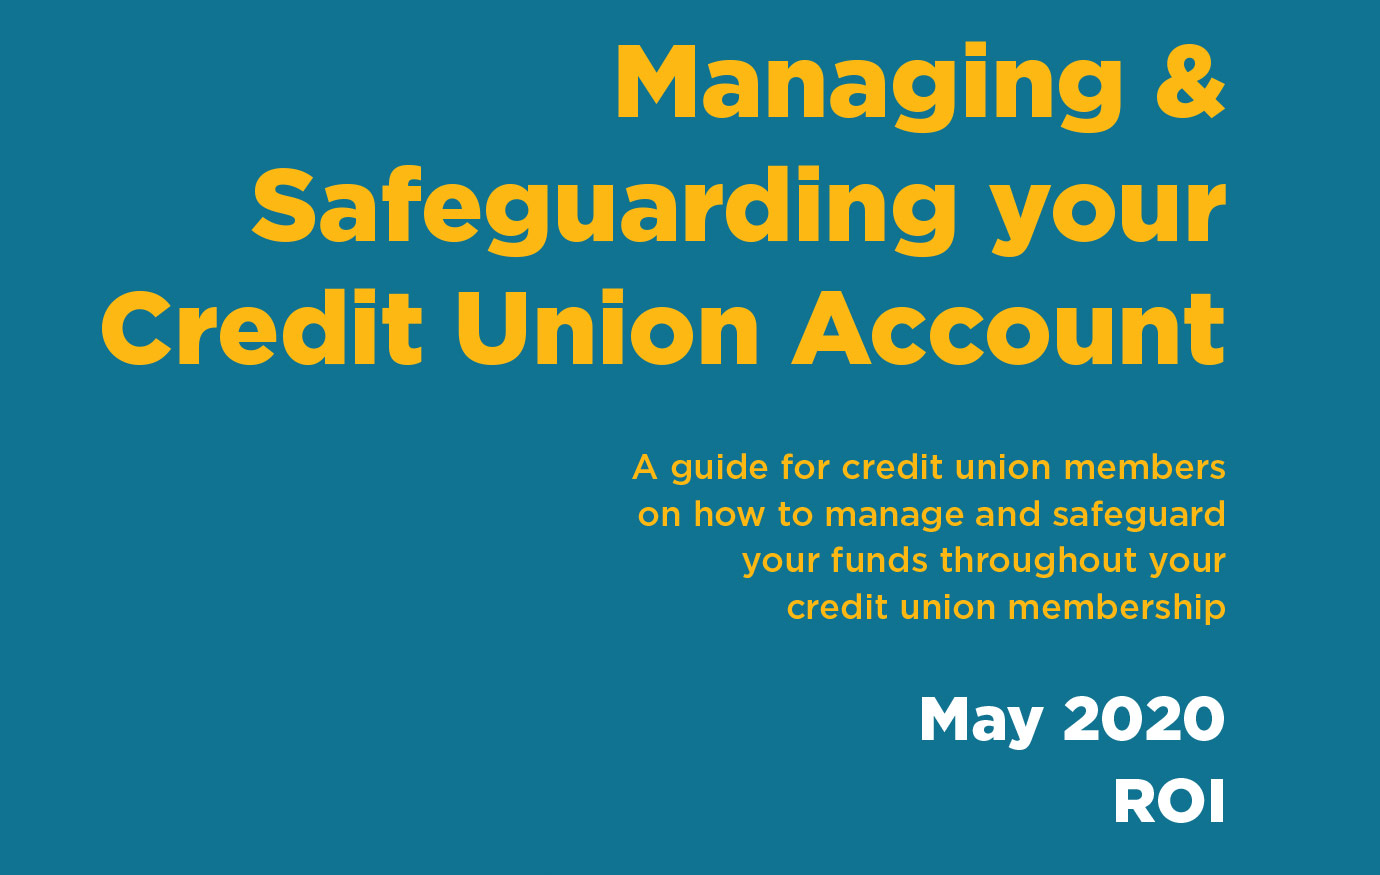 Managing & Safeguarding your Credit Union Account